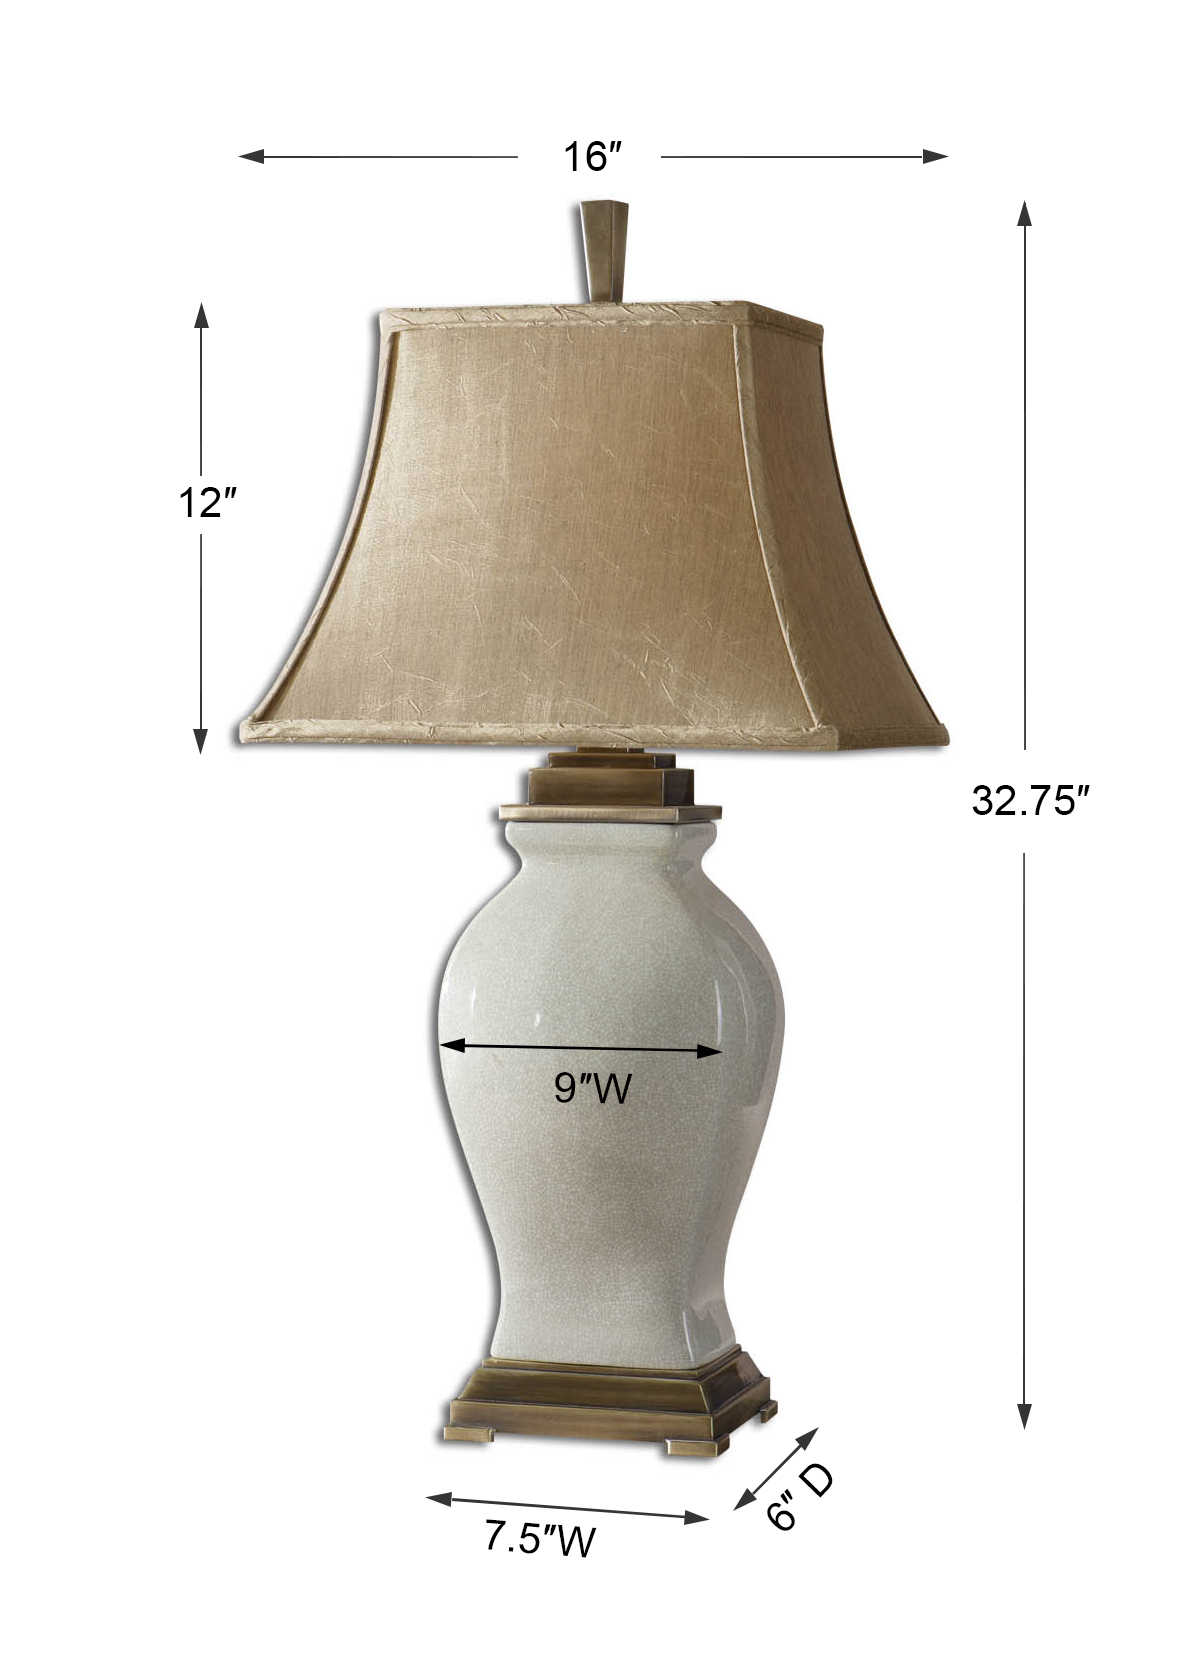 Rory Ivory Table Lamp Uttermost, Uttermost Marius Table Lamp